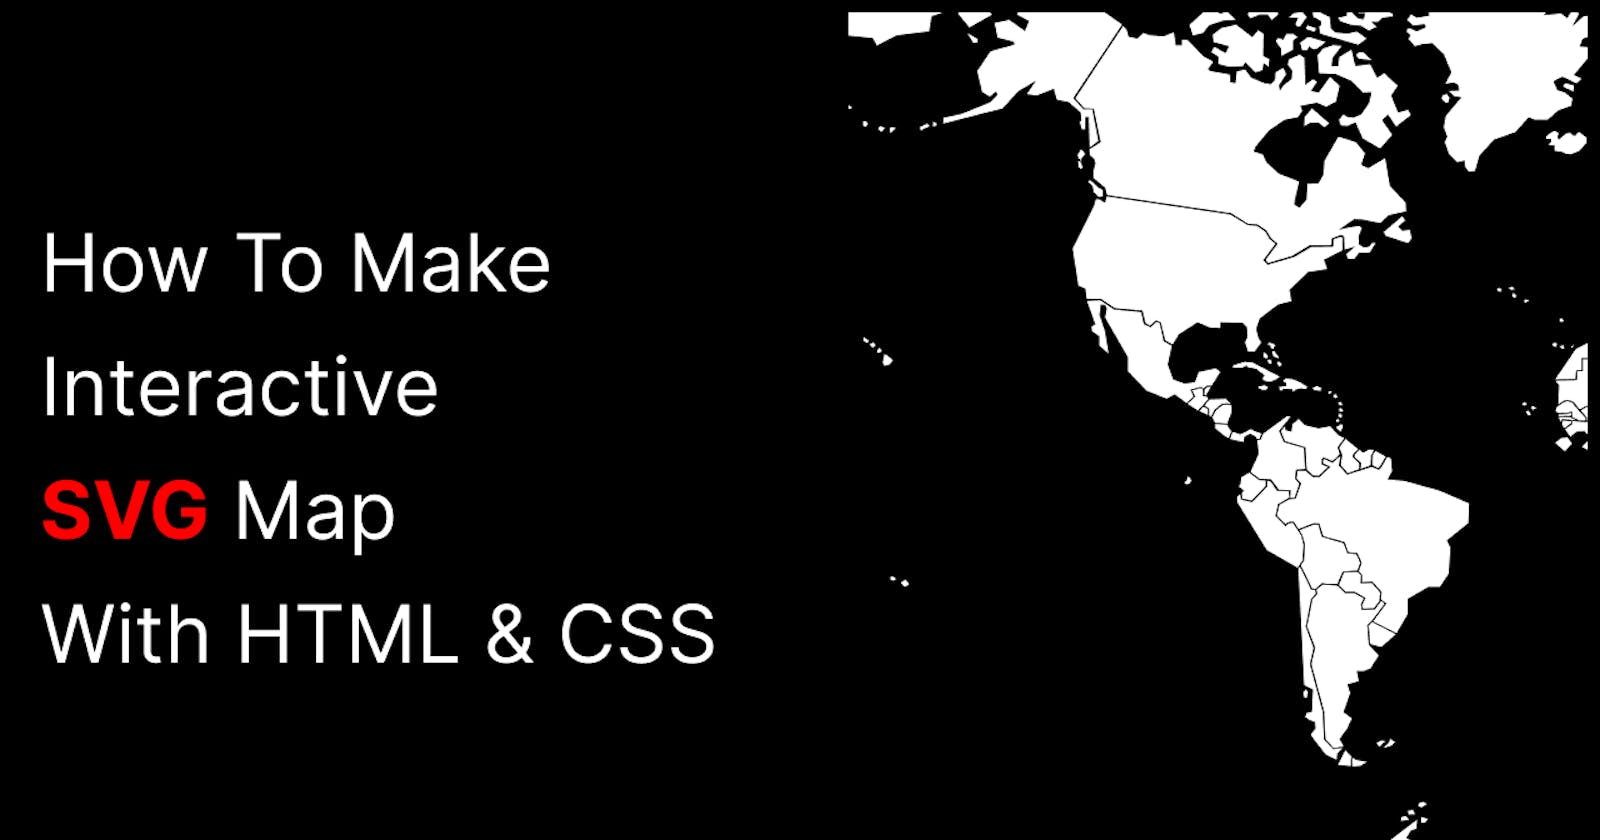 How To Make Interactive SVG Map With HTML & CSS